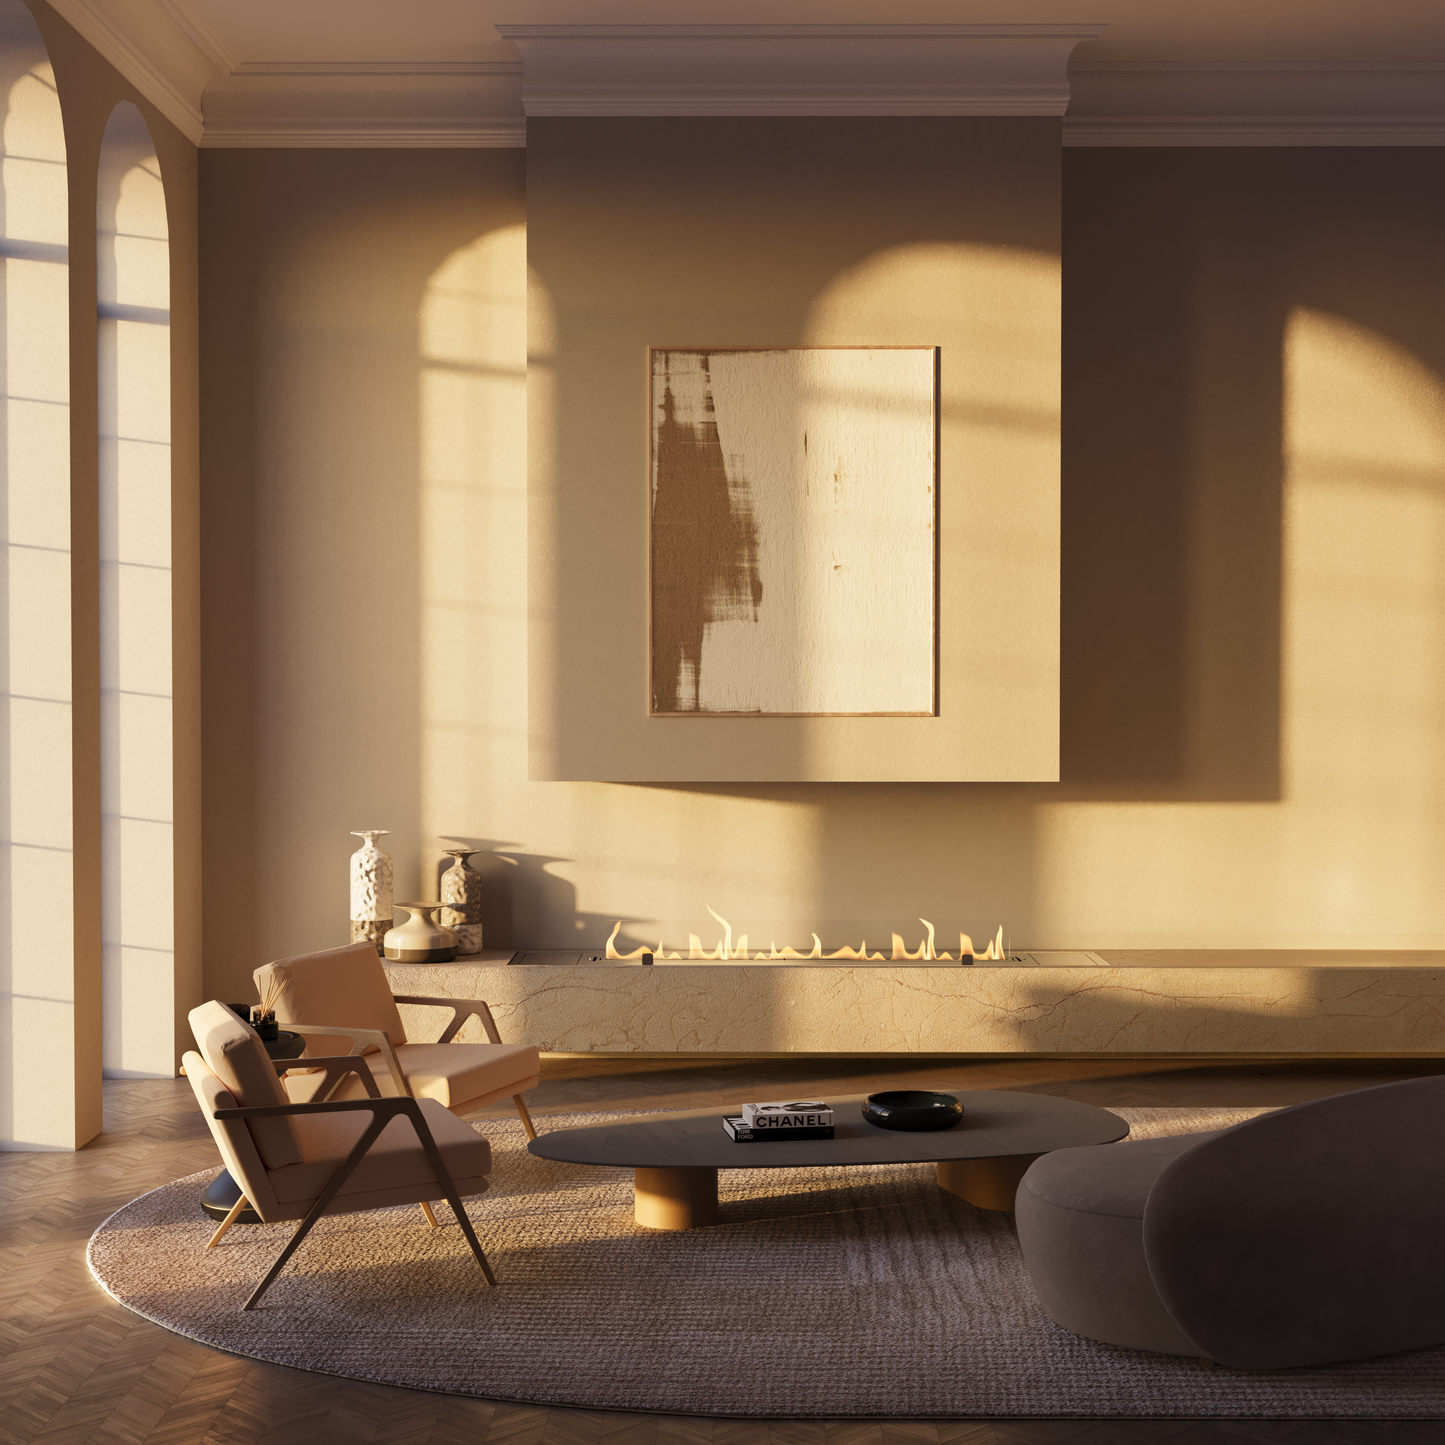 Crea7ionEVOPlus  Insert in fireplace open on three sides with artwork above in contemporary light-coloured living room